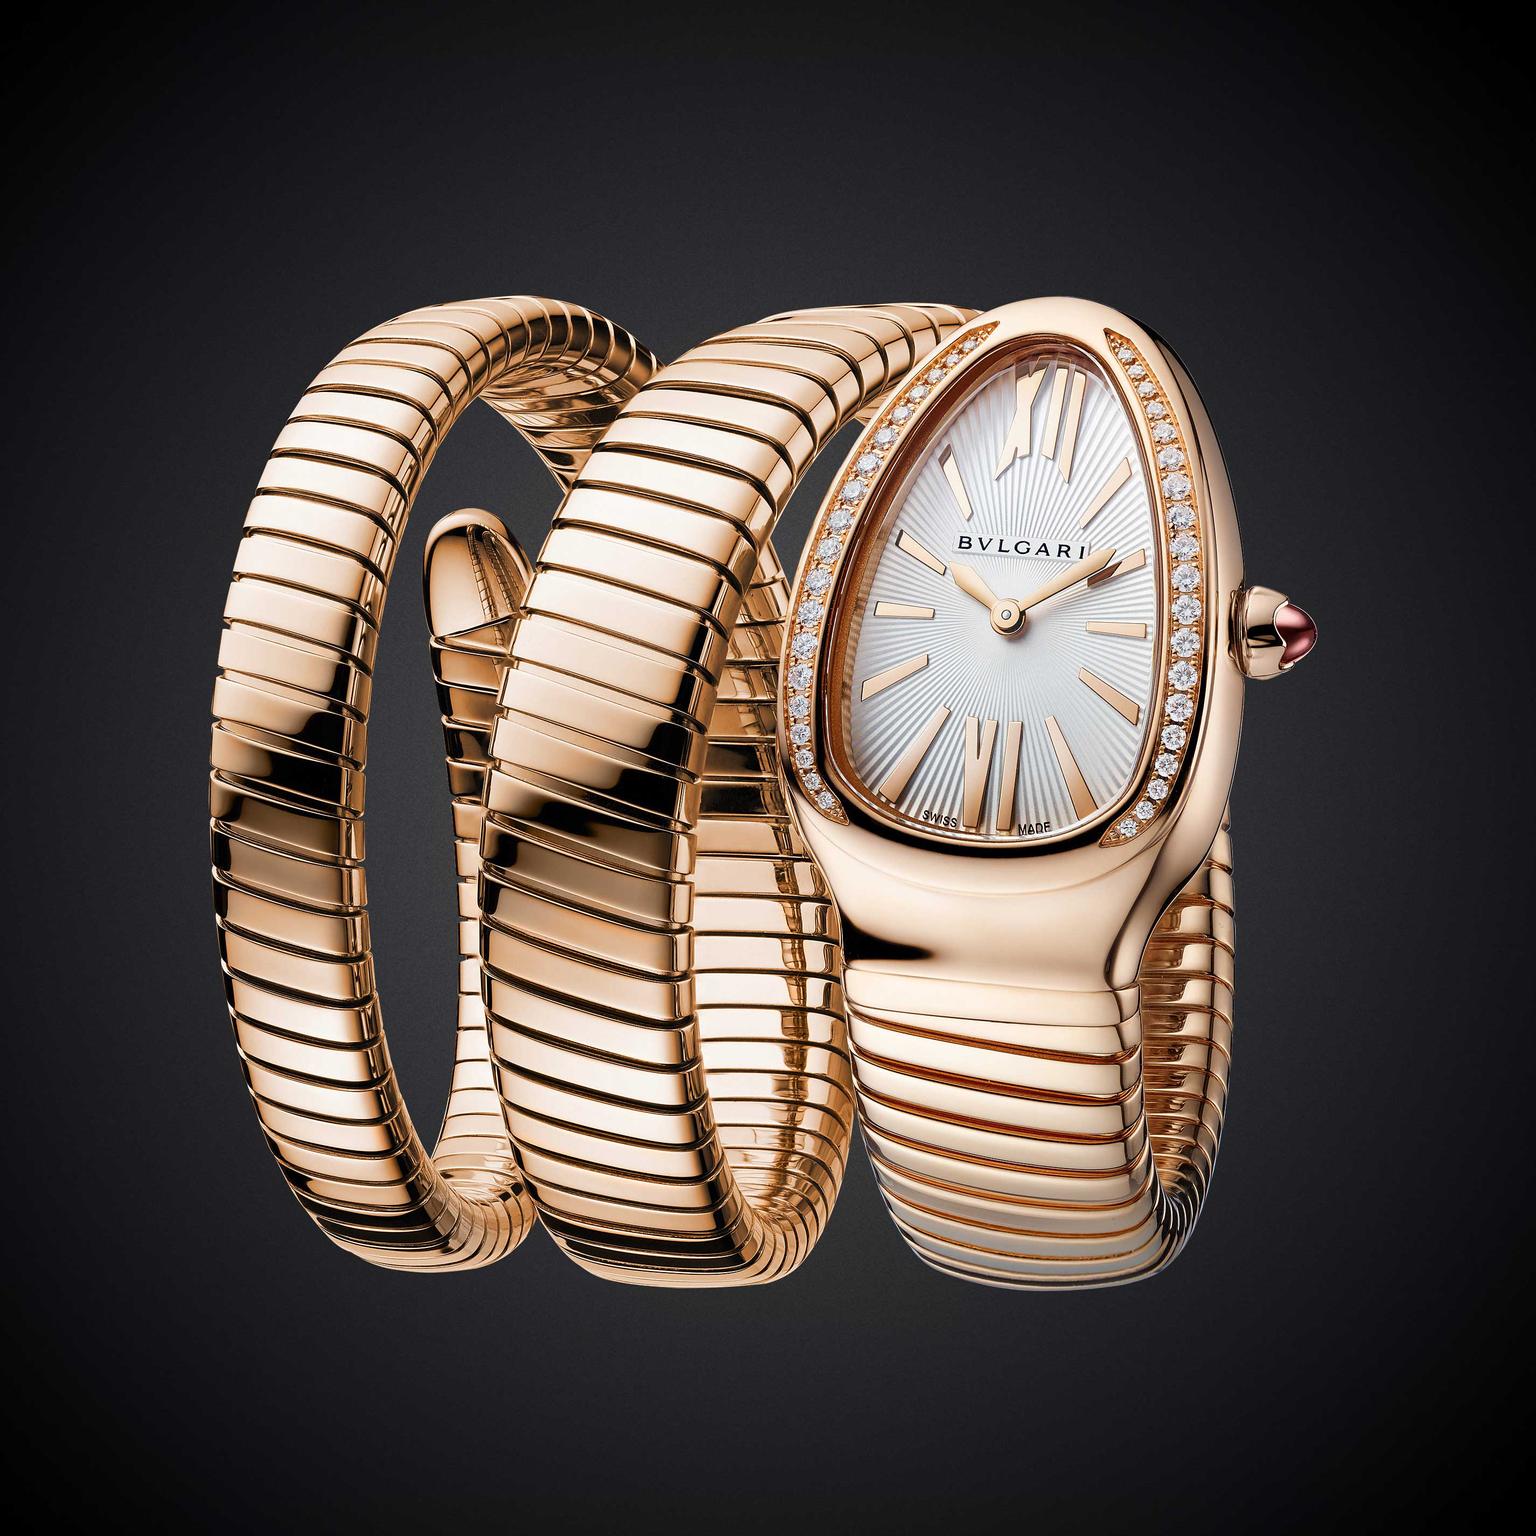 Bulgari Serpenti Tubogas double coil ladies watch in pink gold